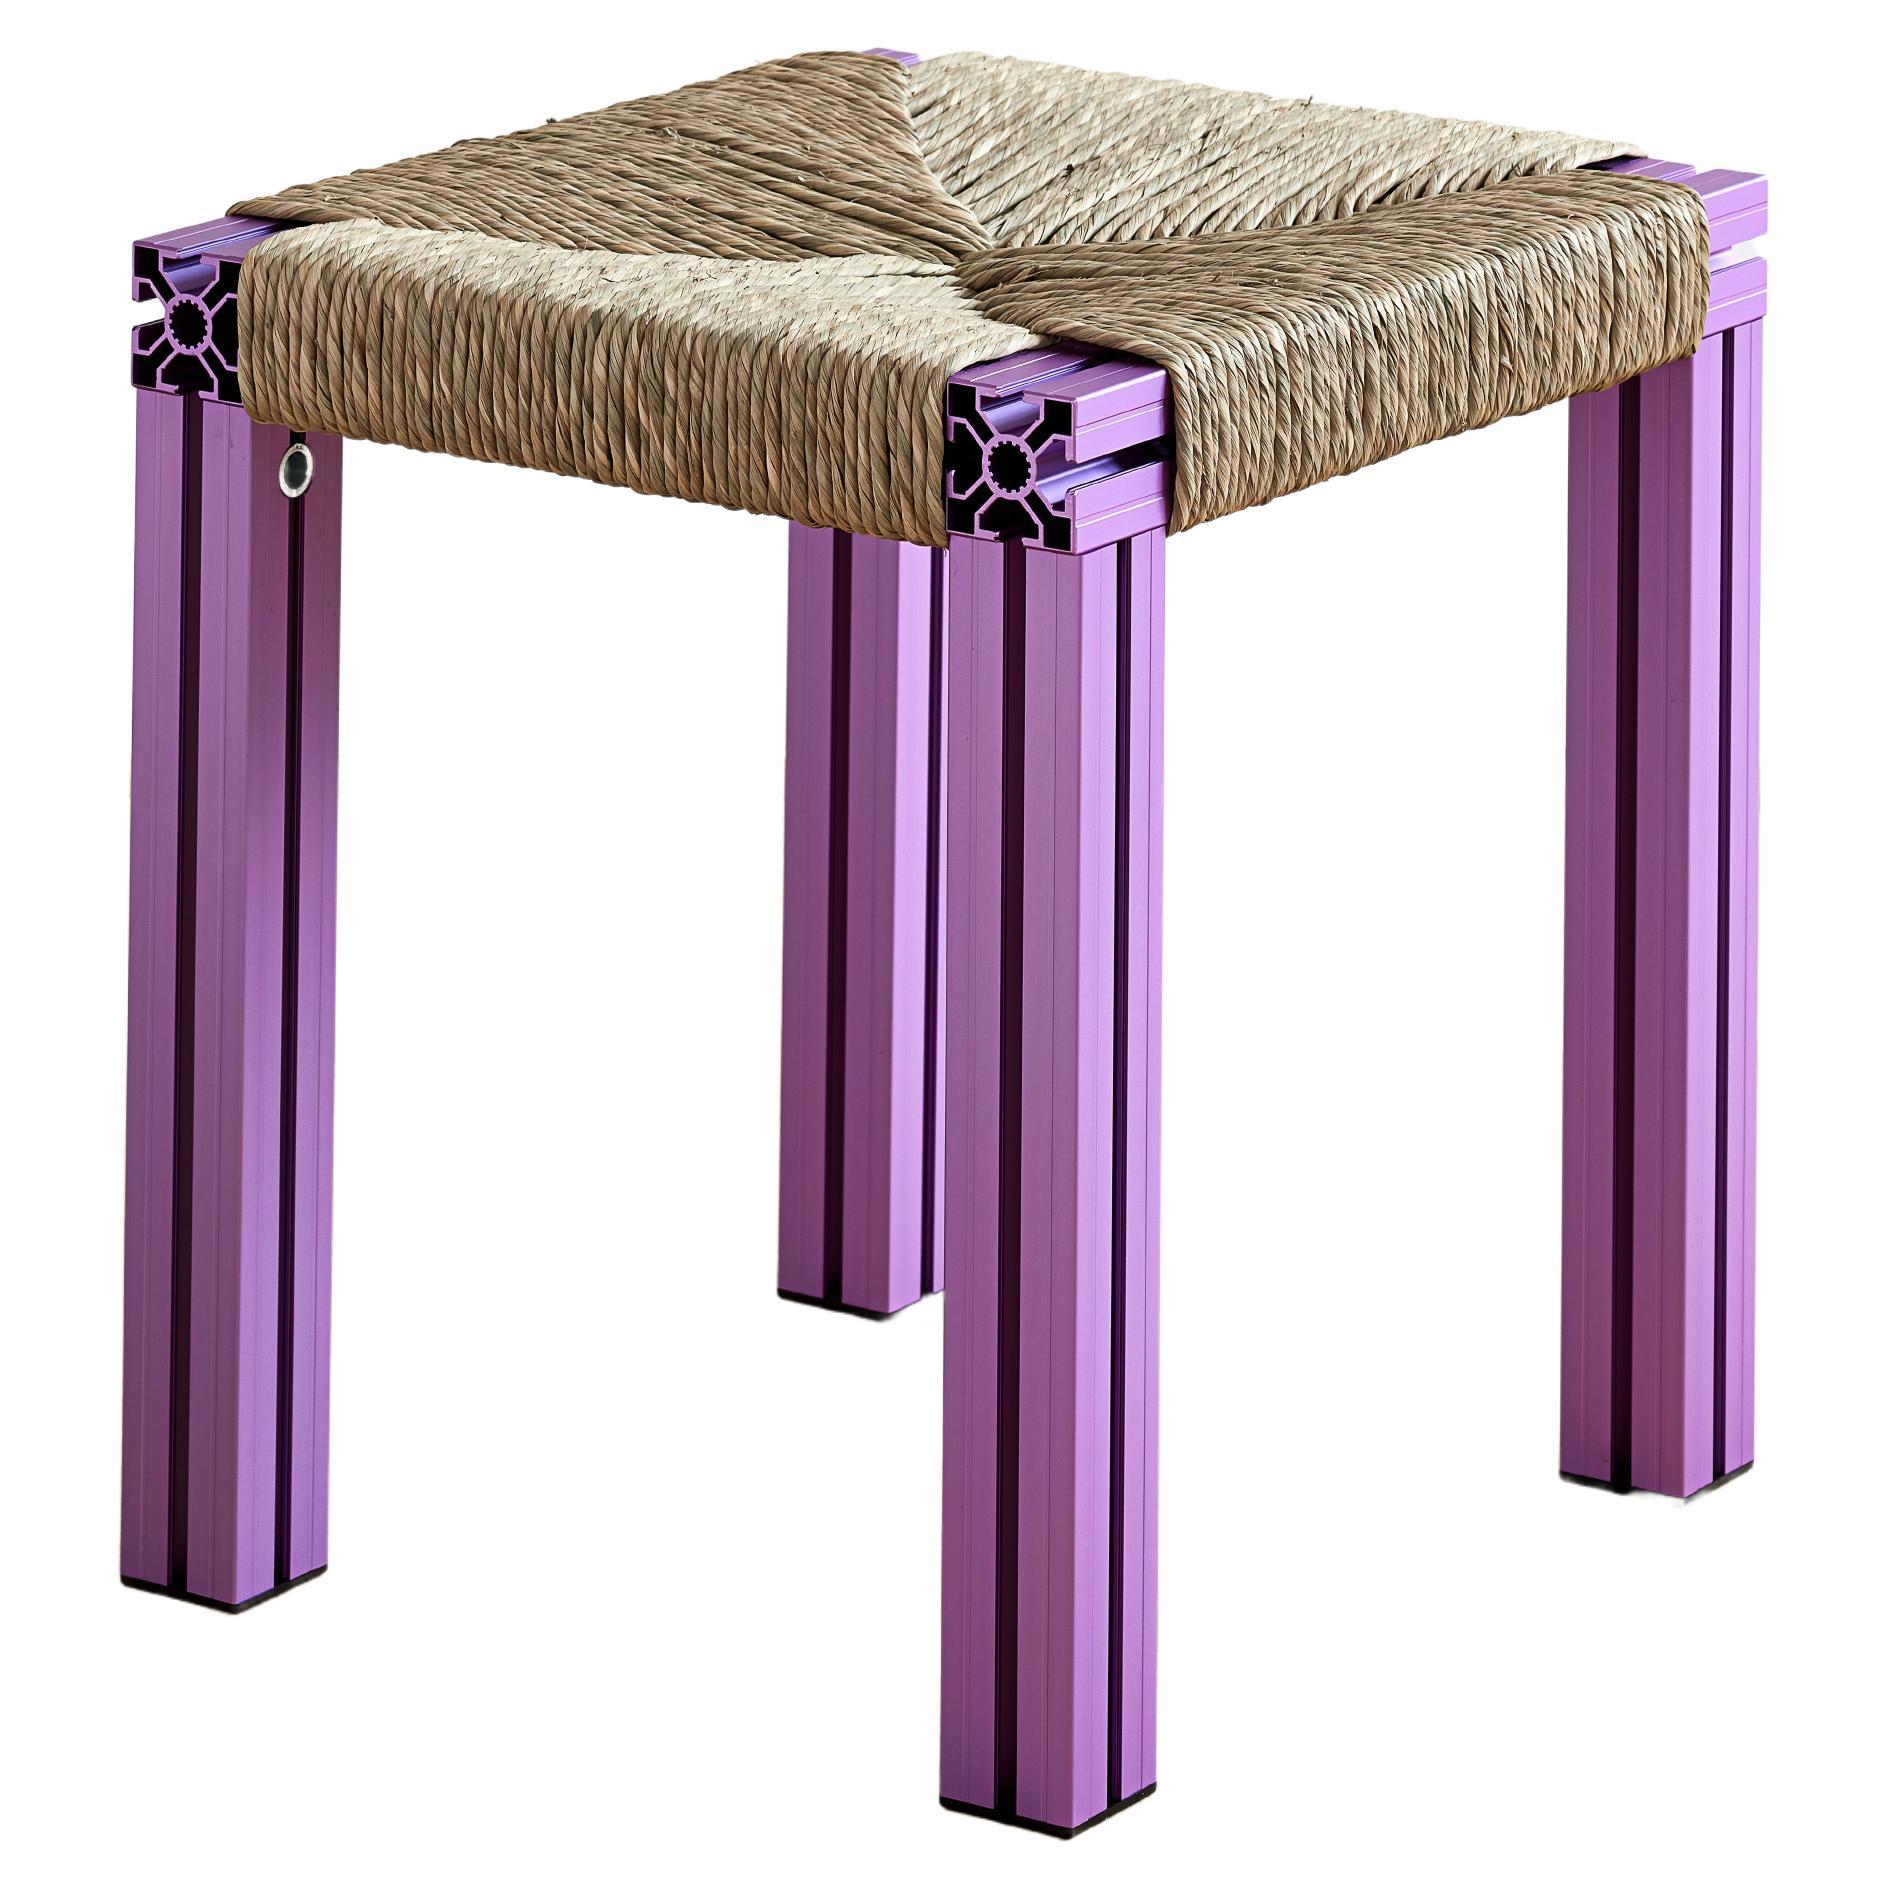 Anodized Purple and Rush Weave Wicker Stool by Tino Seubert For Sale